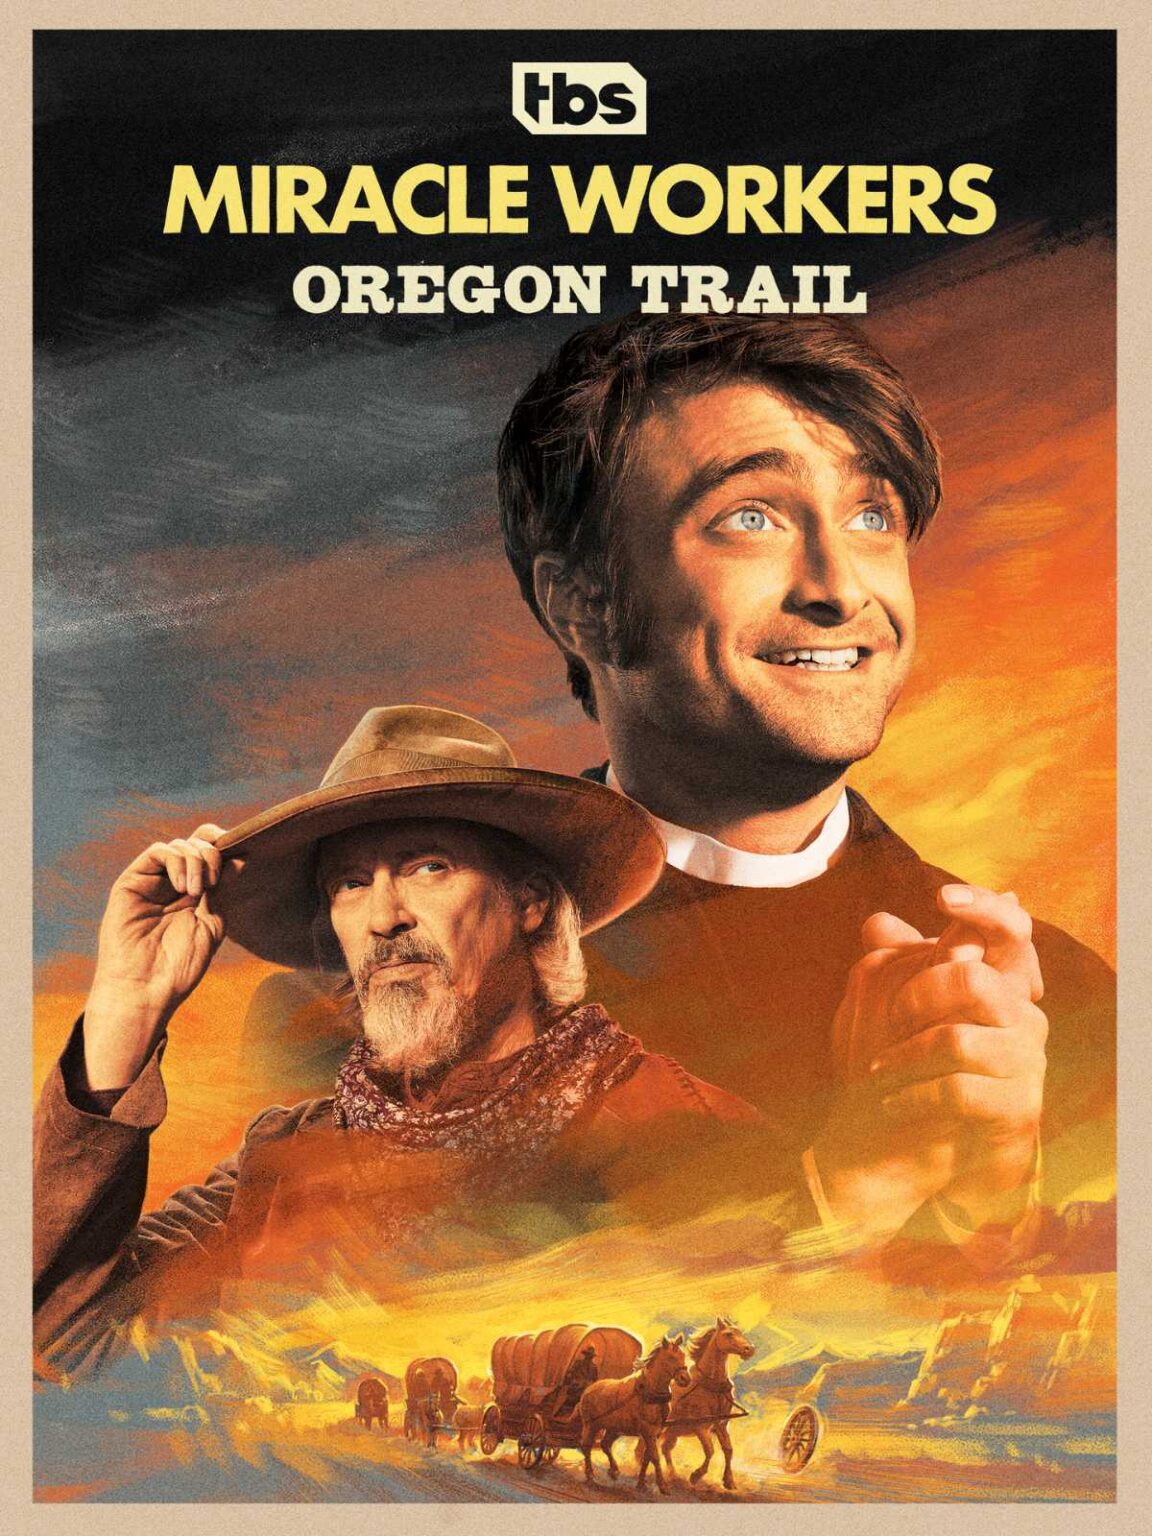 Radcliffe, Buscemi and the Cast on Miracle Workers Oregon Trail